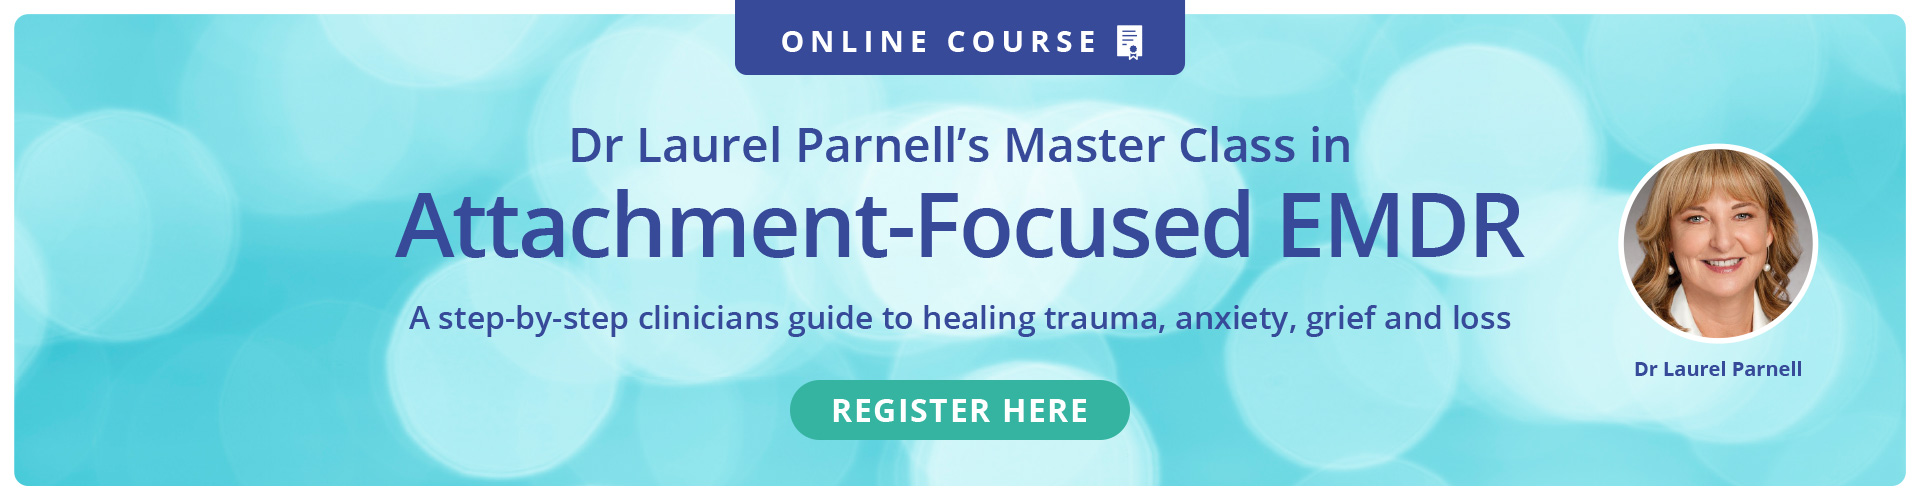 Dr Laurel Parnell’s Master Class in Attachment-Focused EMDR: A step-by-step clinician’s guide to healing trauma, anxiety, grief and loss